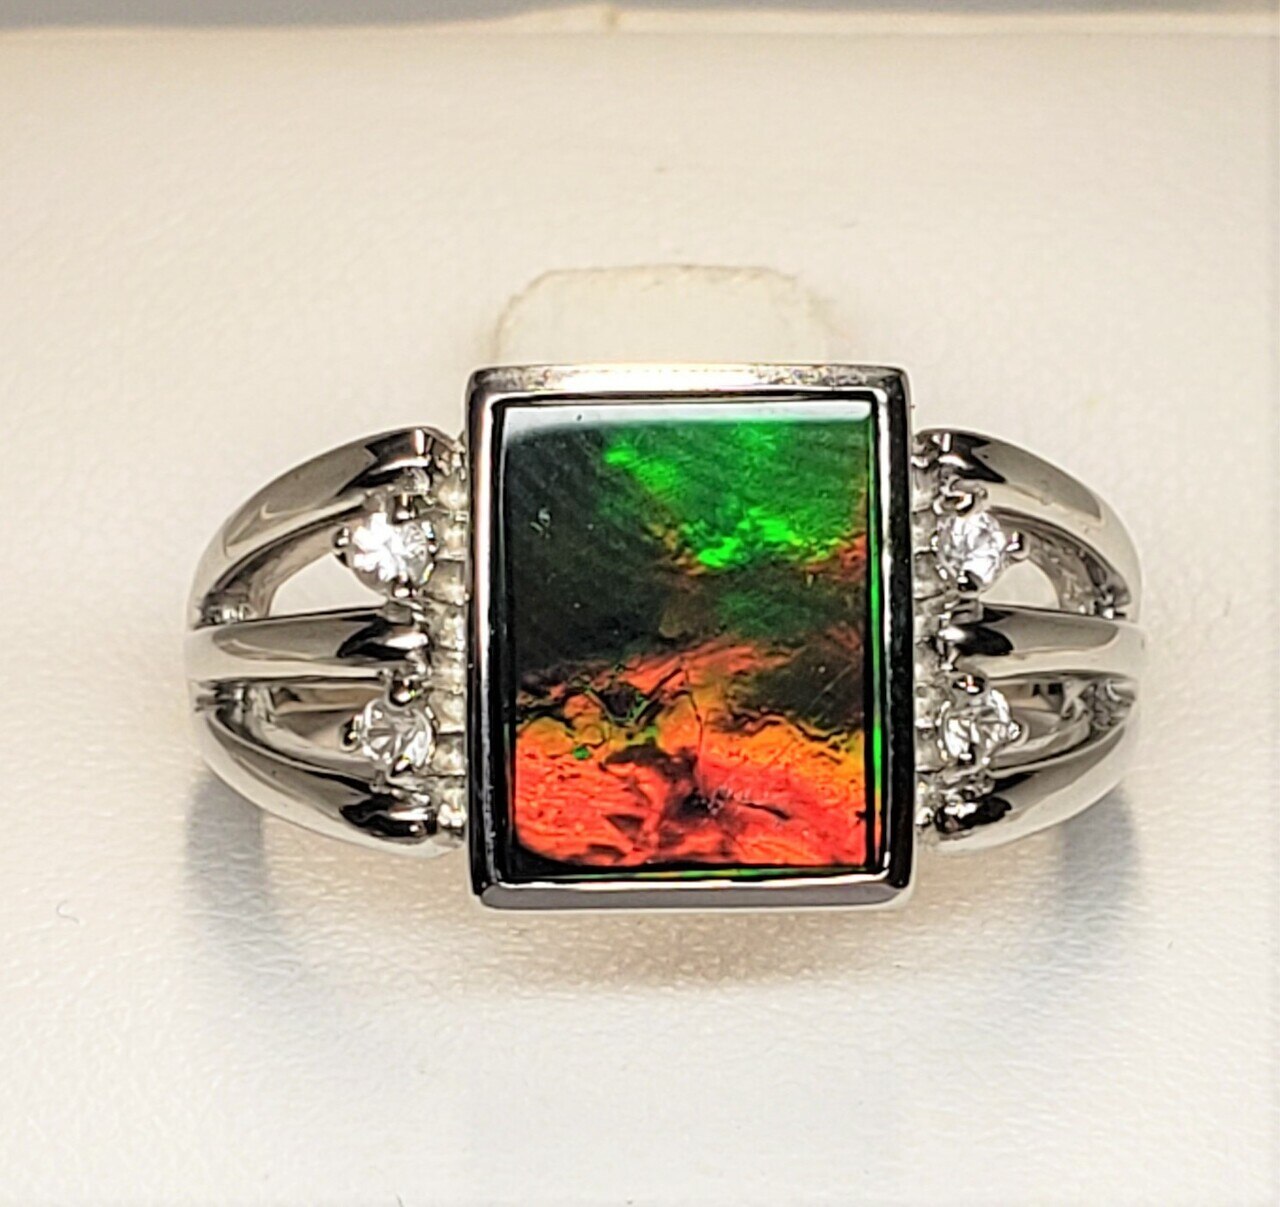 Stunning Sterling Silver Triplet Ammolite Ring with a 8 x 12 mm Ammolite Triplet Gemstone Gem with a pallet of Green, Red and Gold Colors